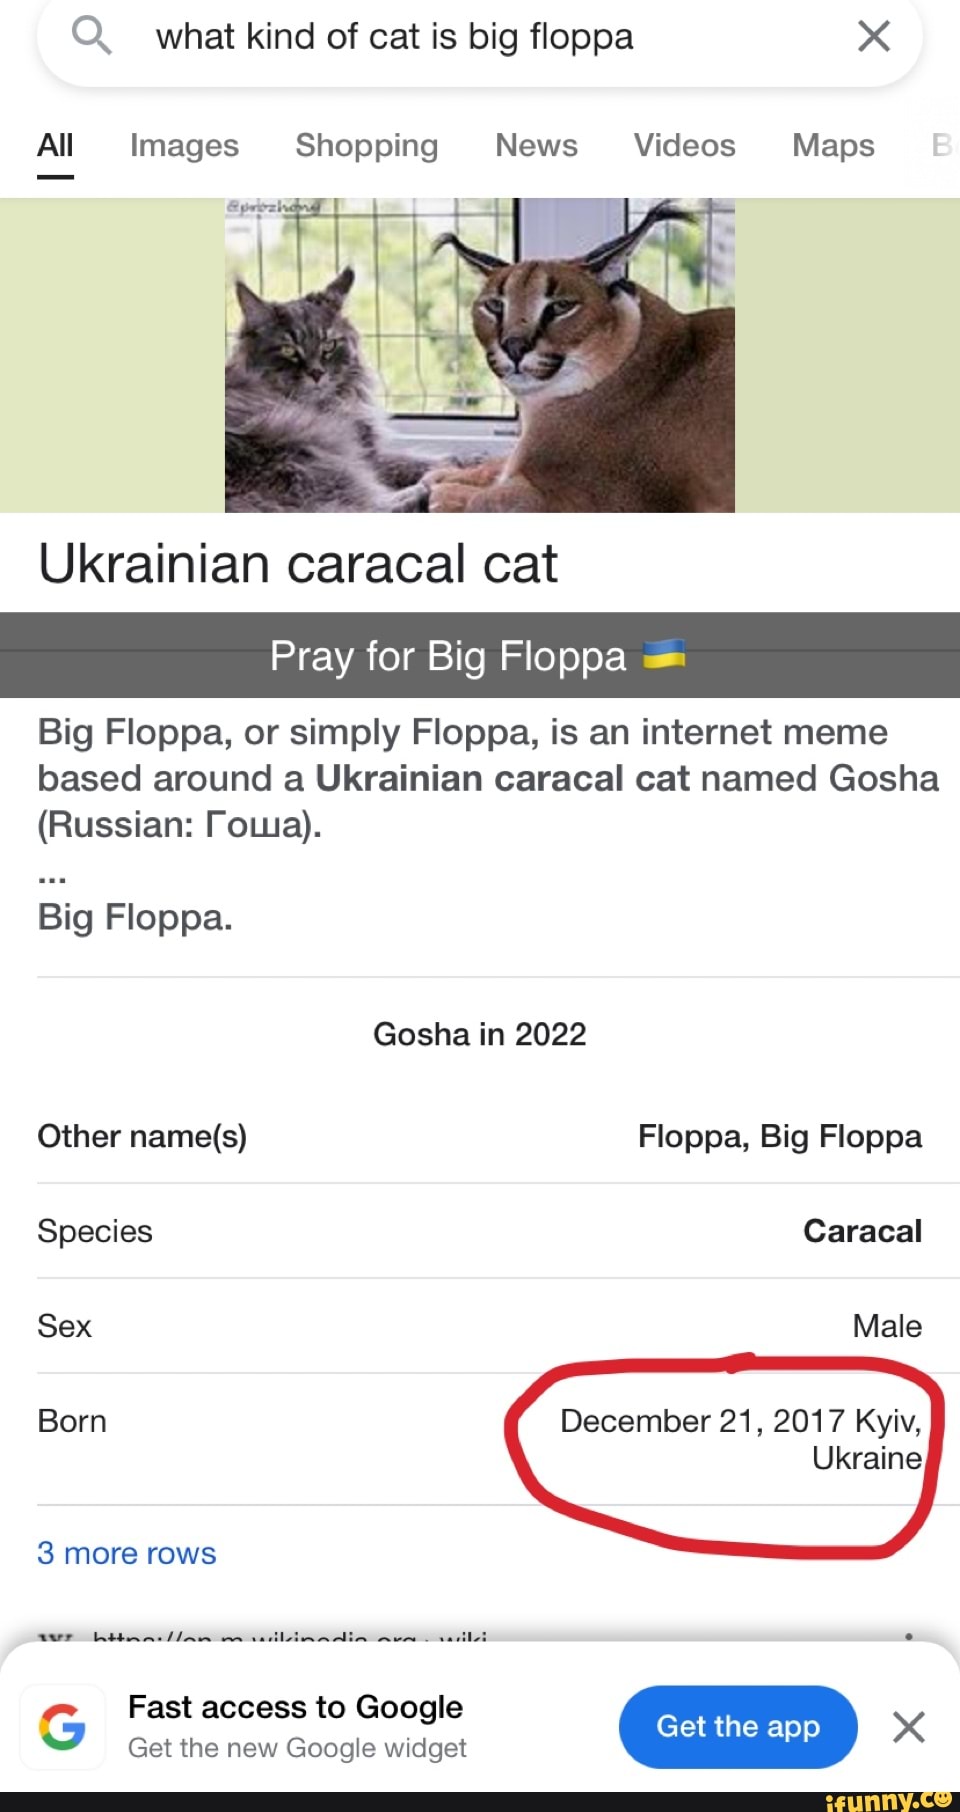 Image of a cat named floppa